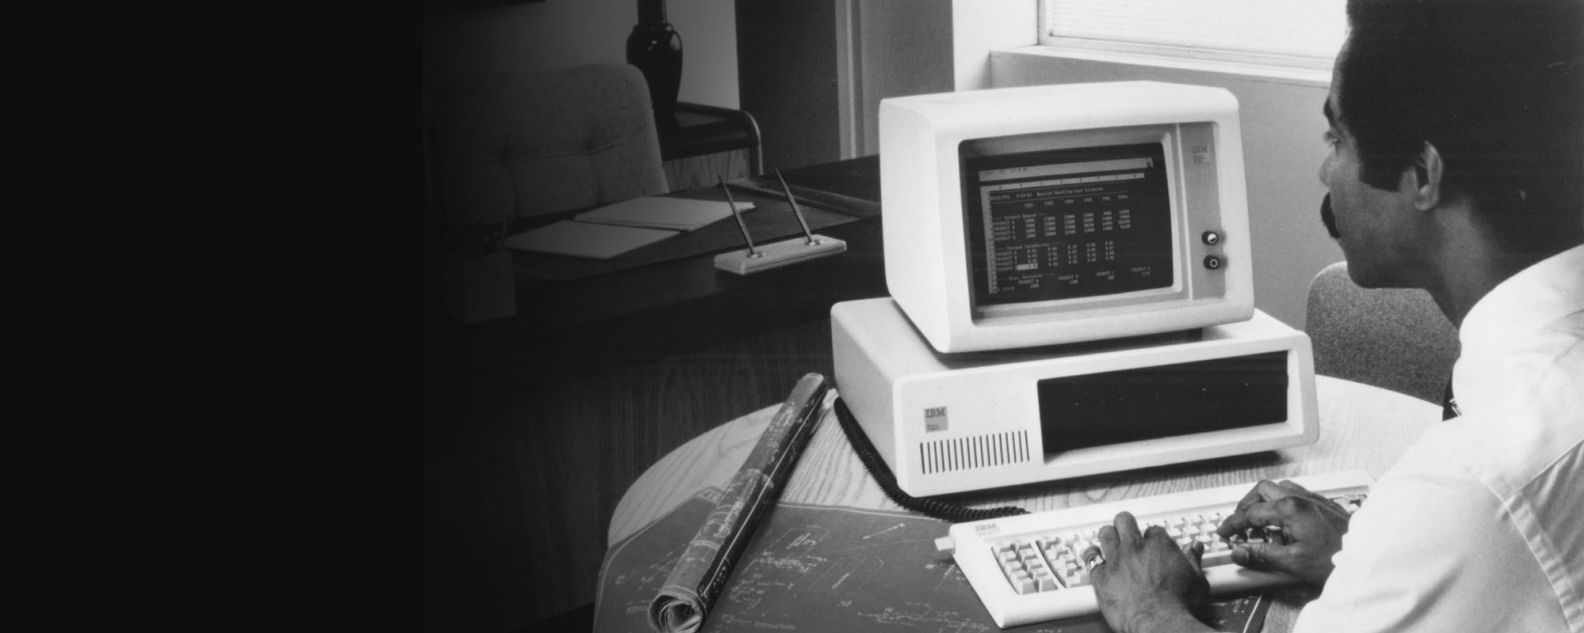 The original IBM 5150 PC with two floppy drives and a monochrome cathode-ray tube display